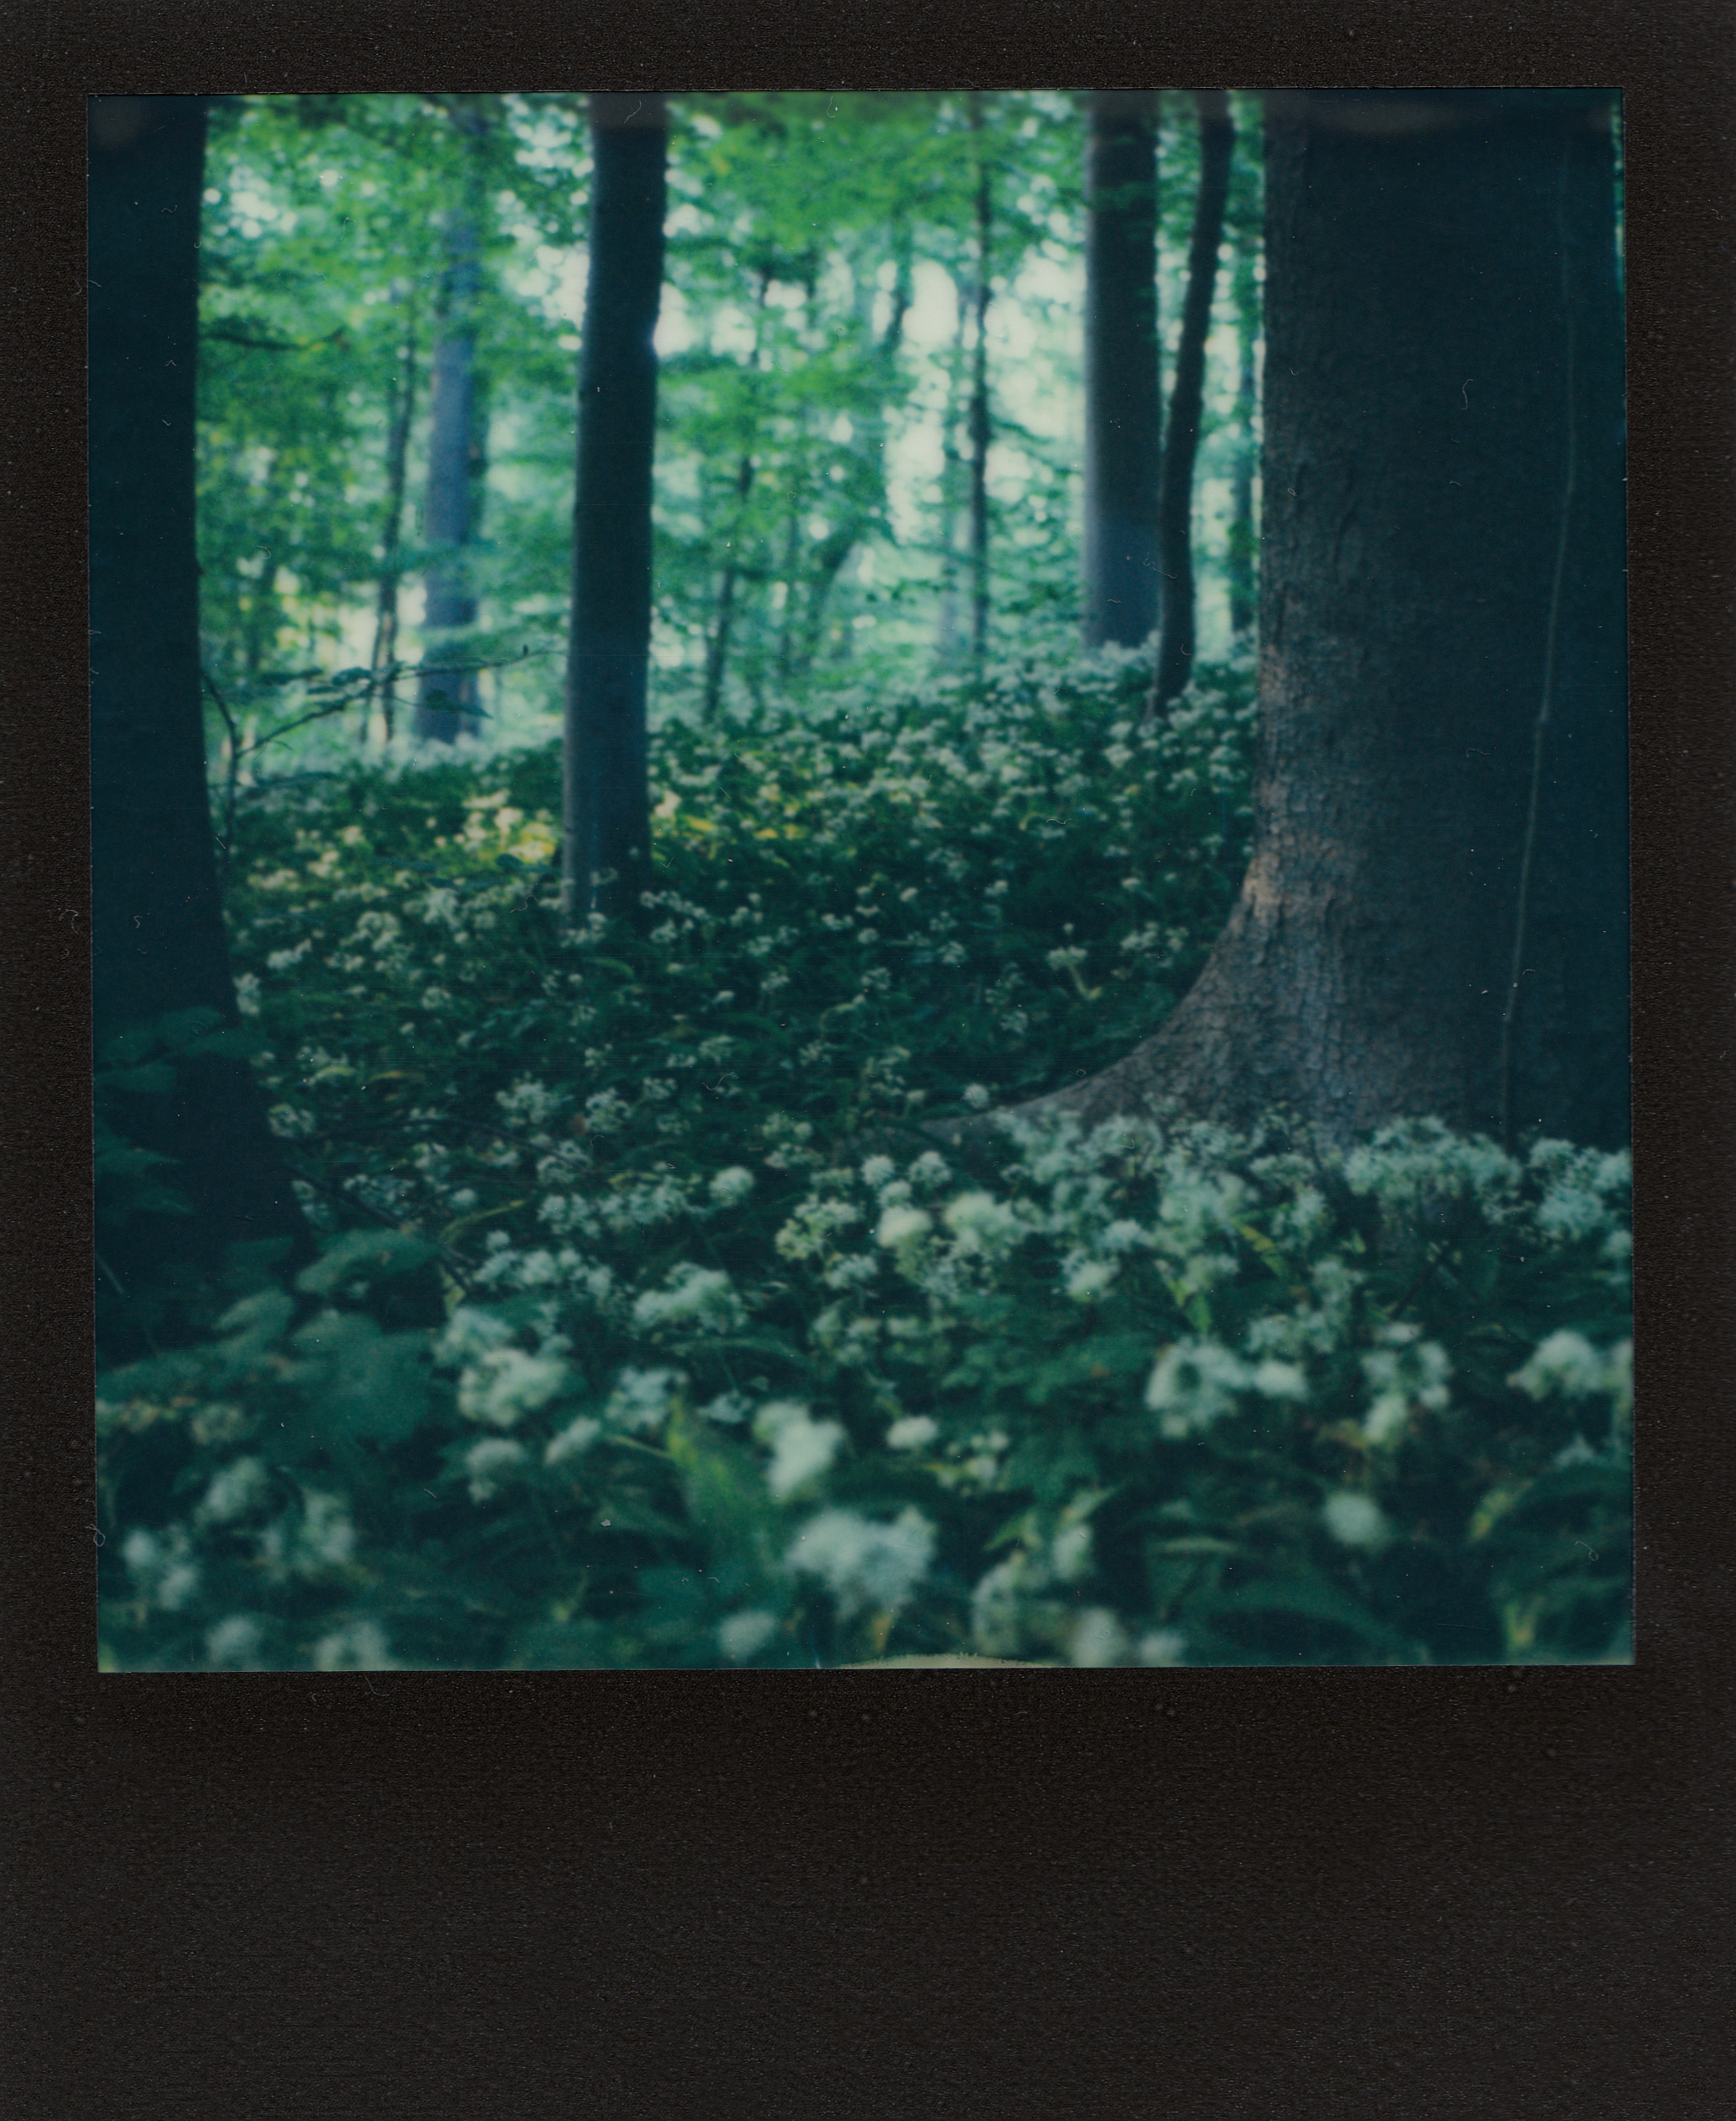 Something Out Of A Fairytale | Polaroid Land Camera SX-70 | Impossible Project Expired 600 | Ioana Taut